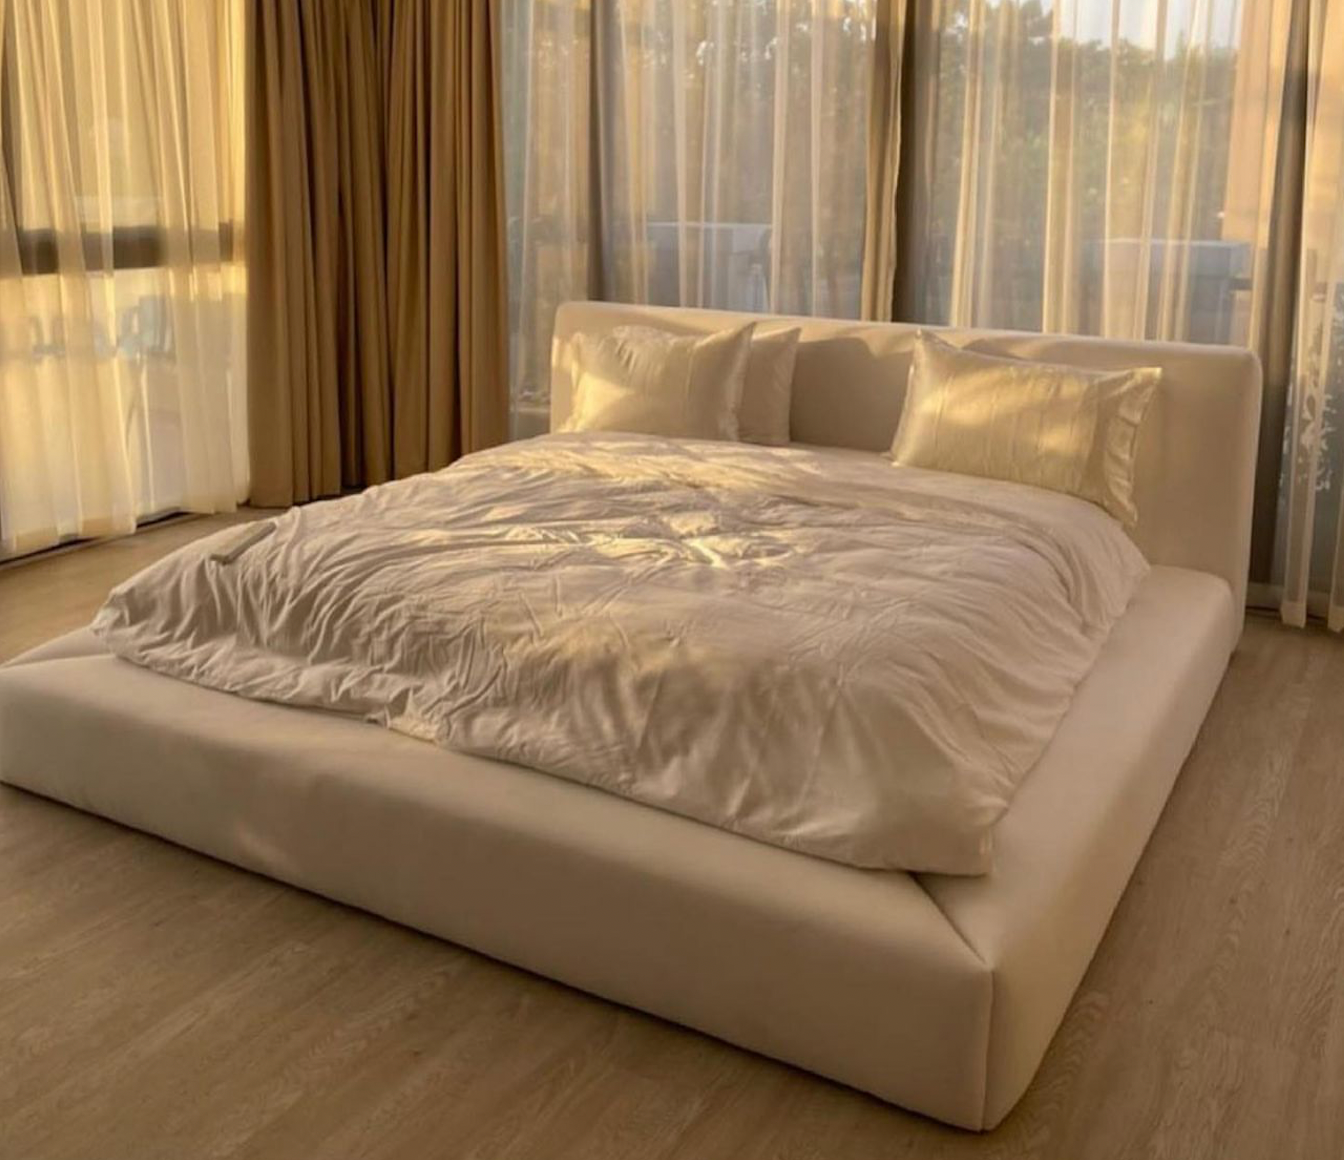 The Stella Bed